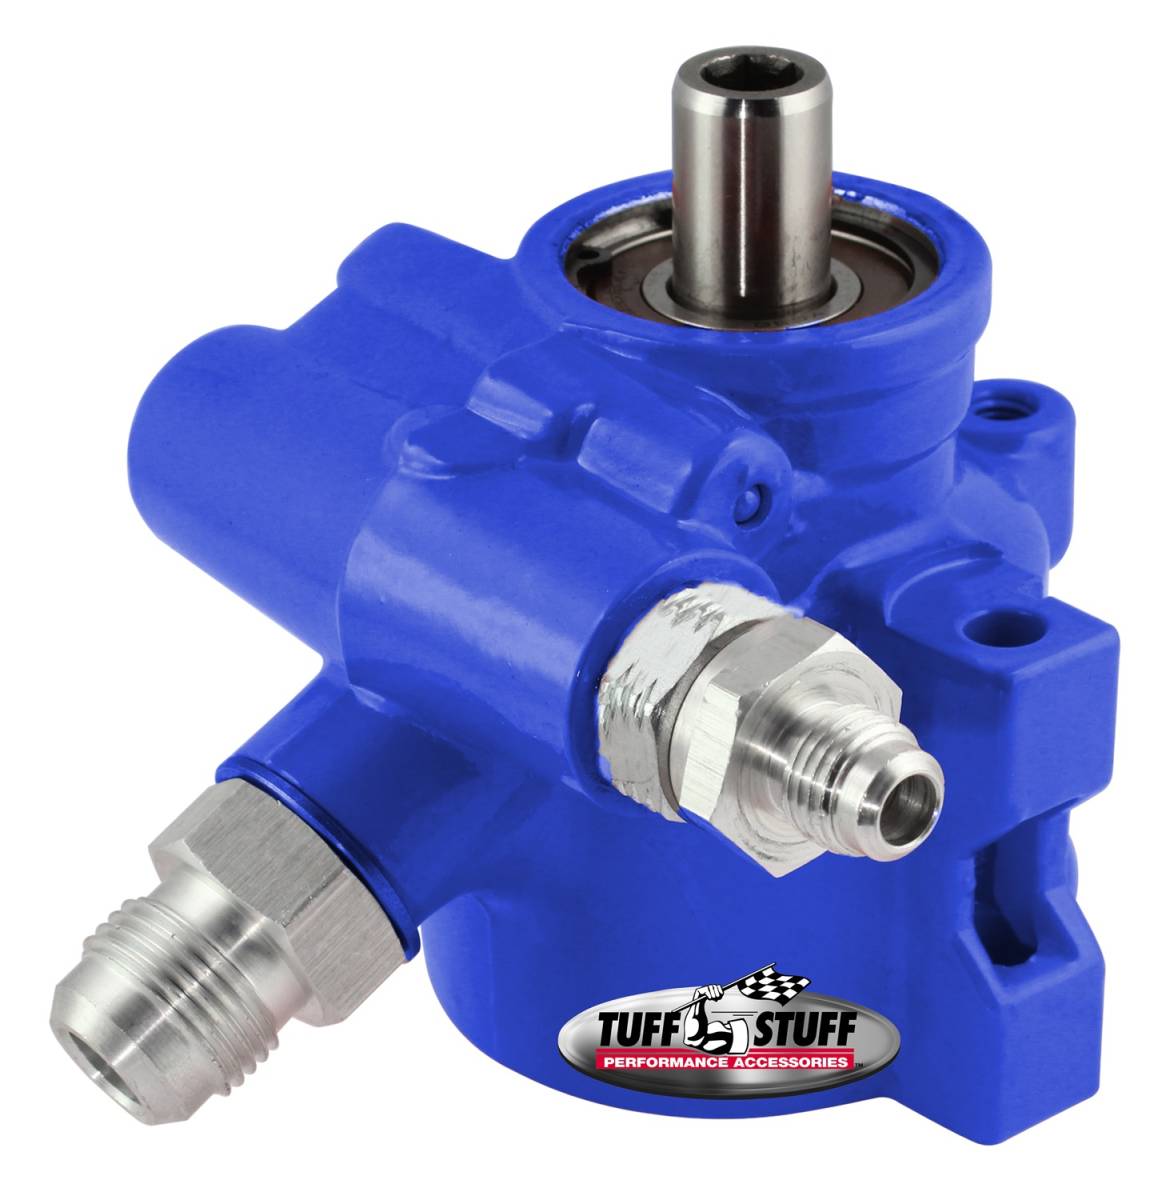 Tuff Stuff Performance - Type II Alum. Power Steering Pump AN-6 And AN-10 Fittings 8mm Through Hole Mounting Aluminum For Street Rods/Custom Vehicles w/Limited Engine Space Blue 6175ALBLUE